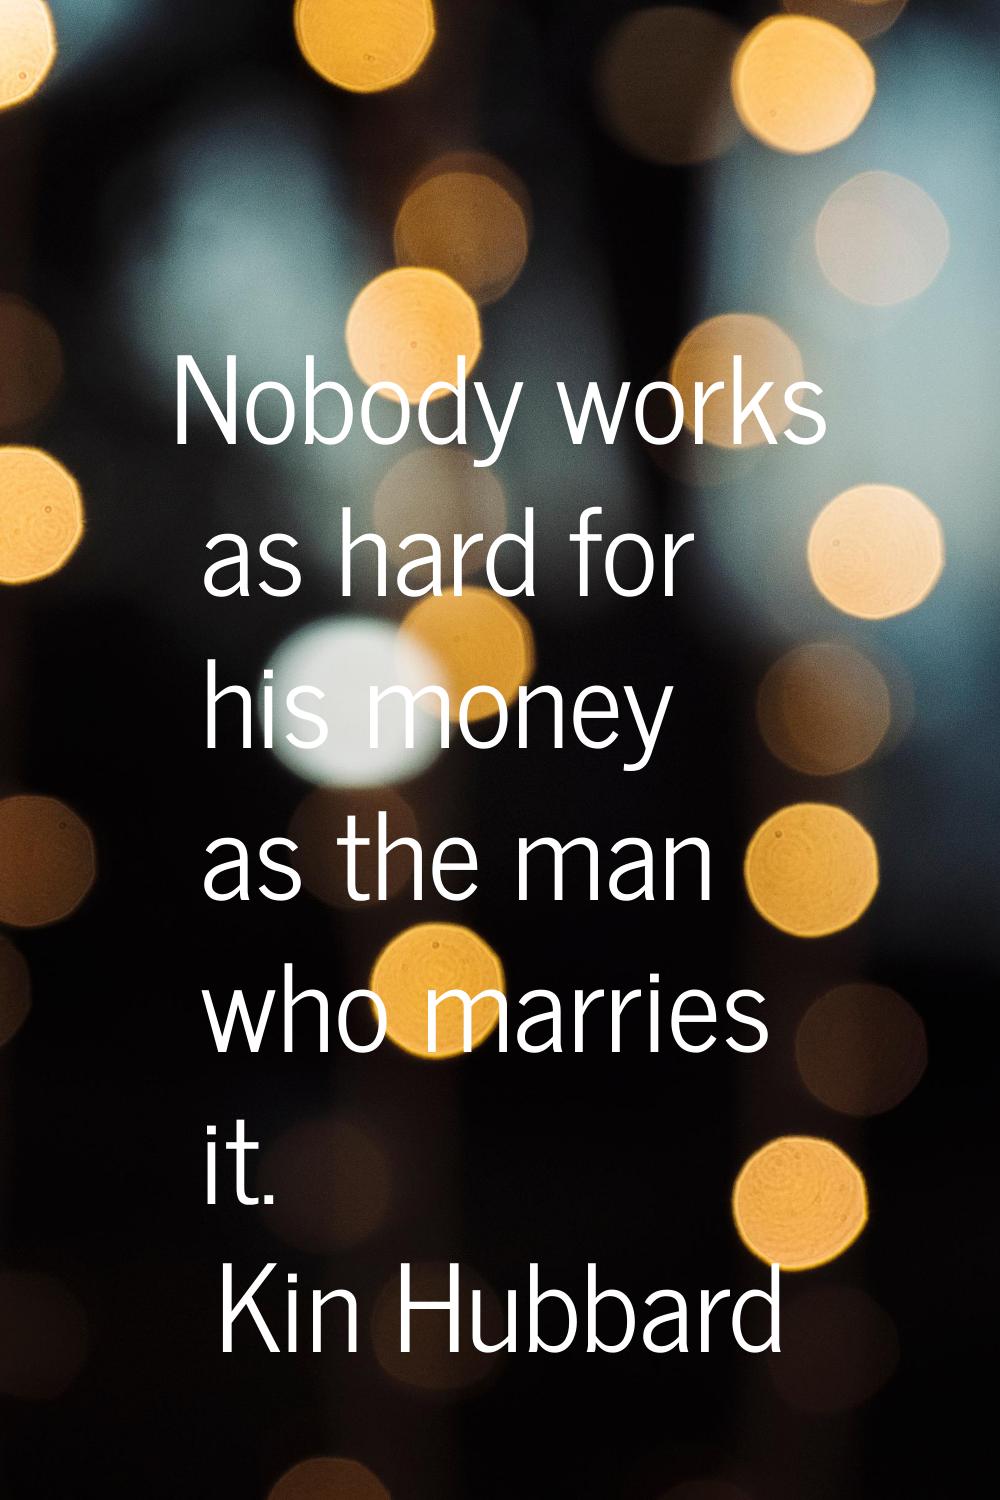 Nobody works as hard for his money as the man who marries it.